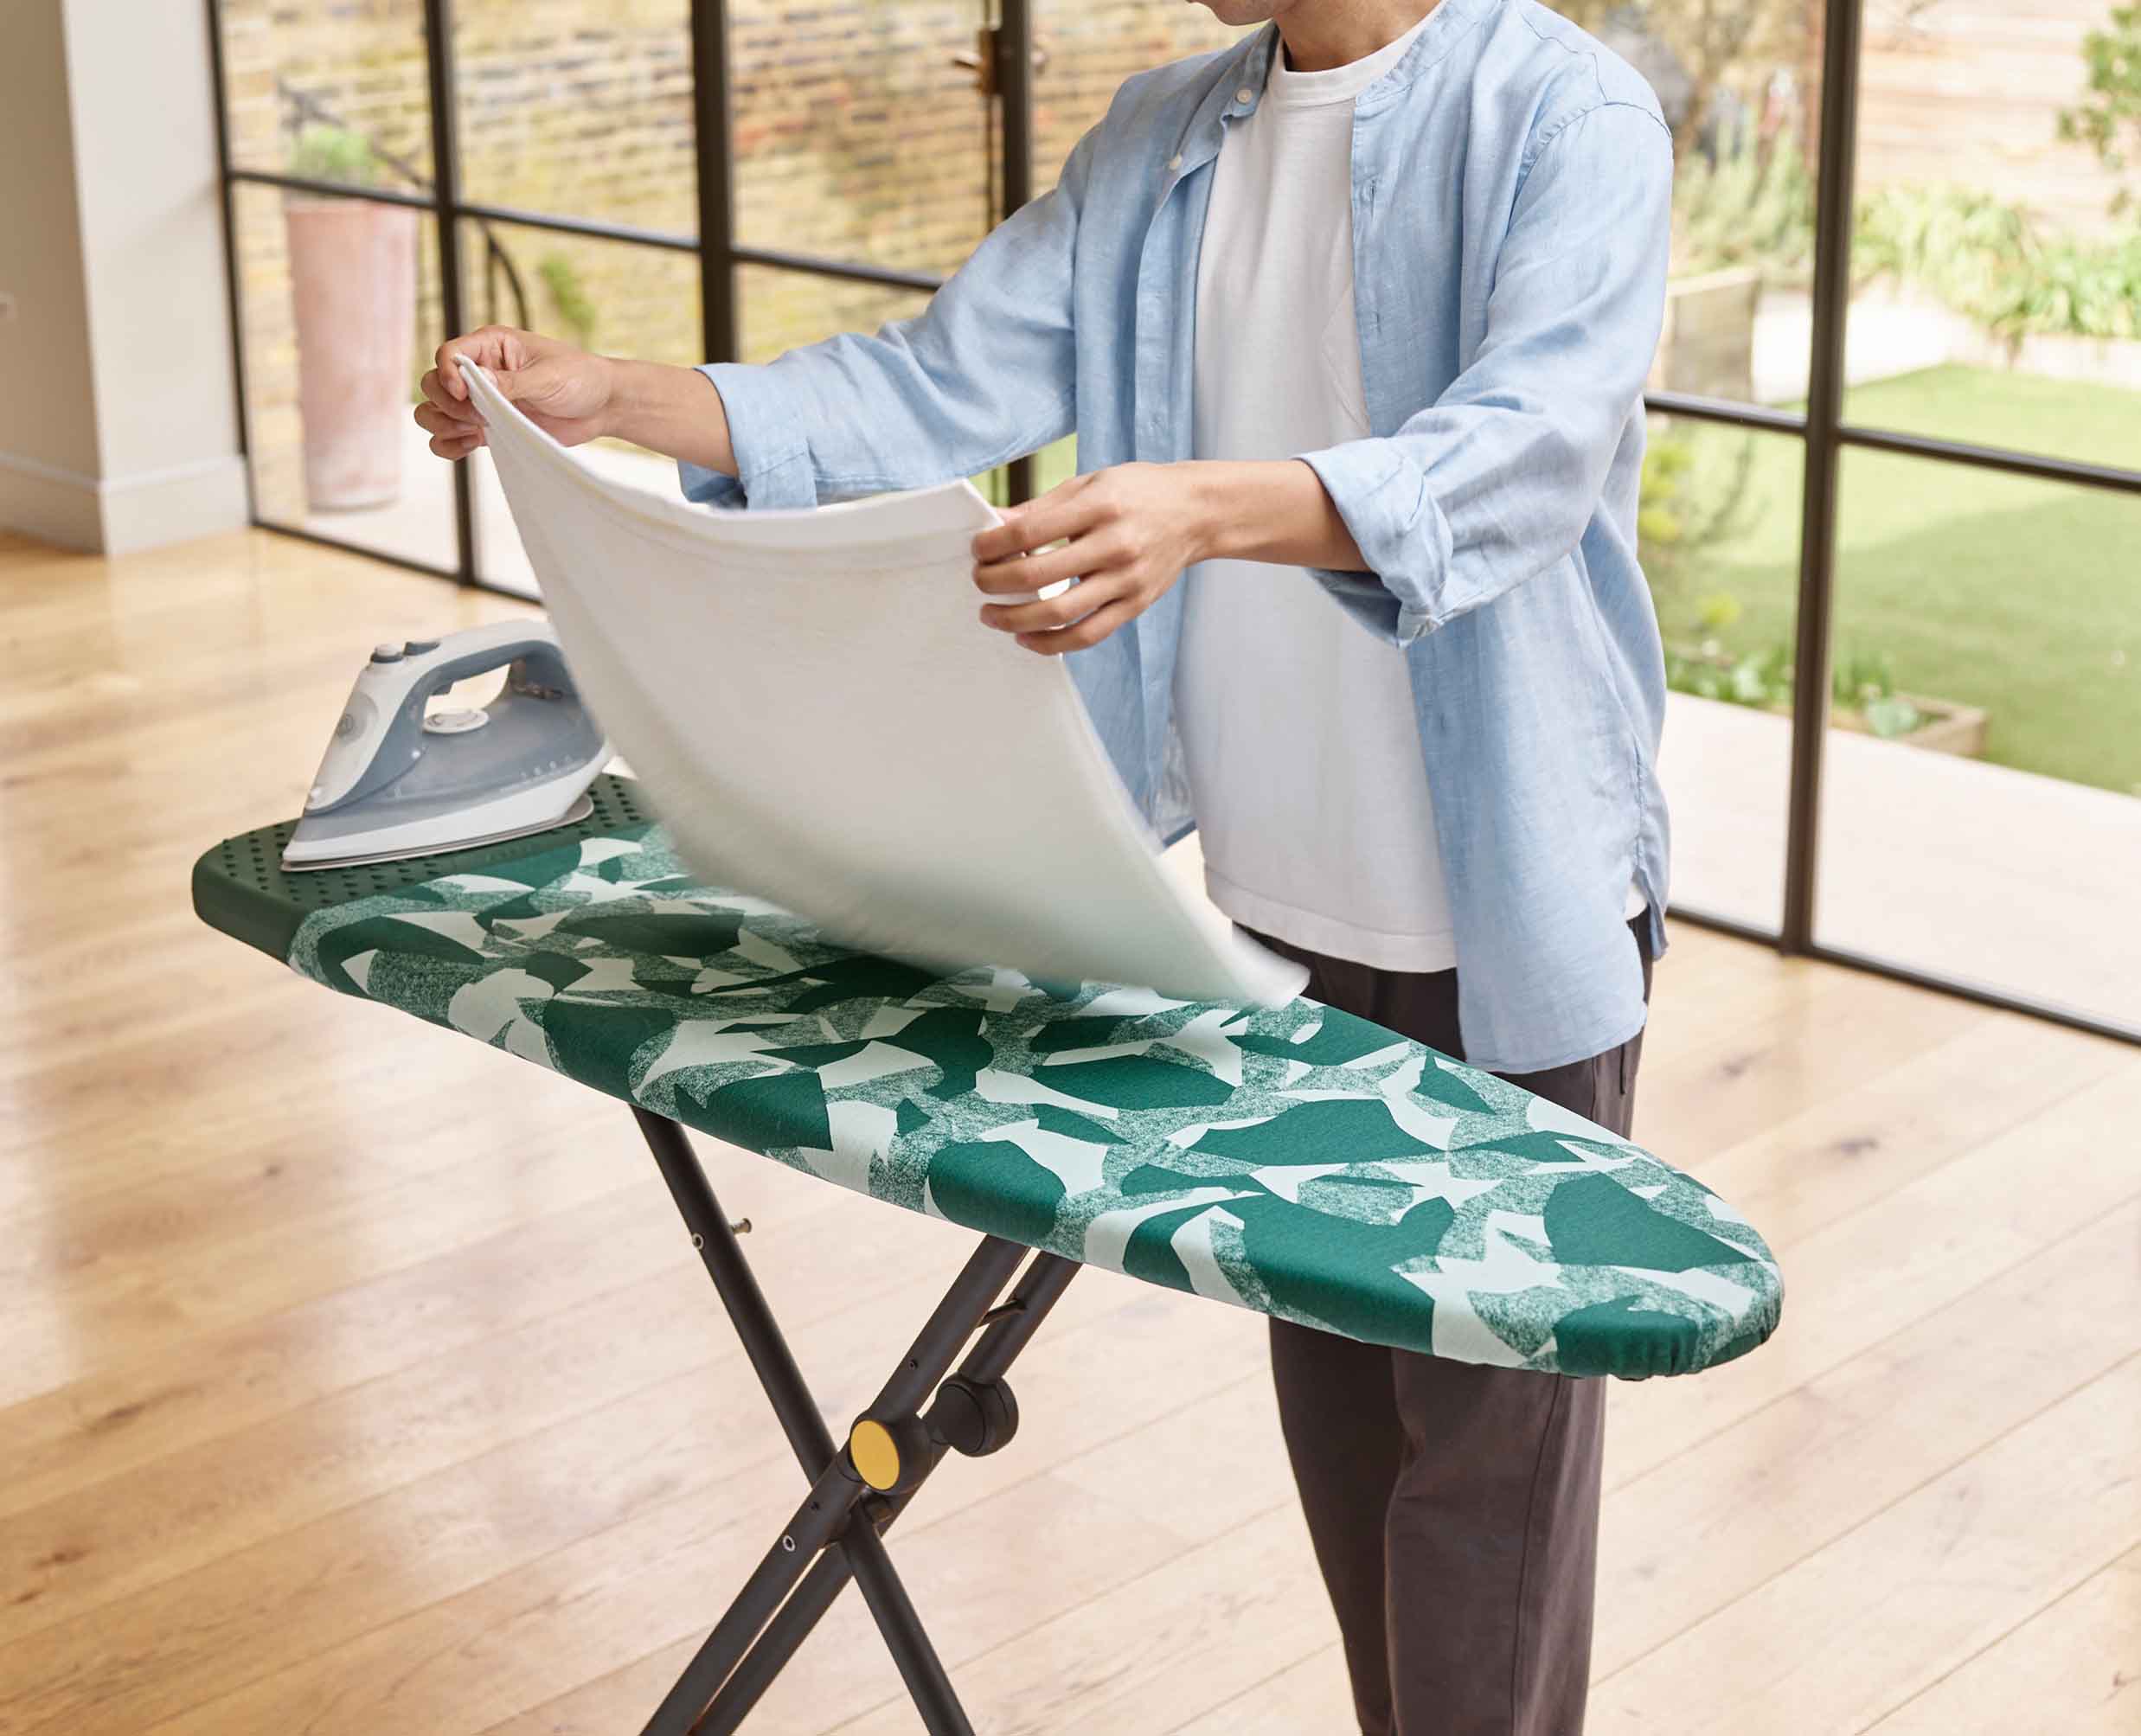 Glide Easy-store Ironing Board - 50035 - Image 3